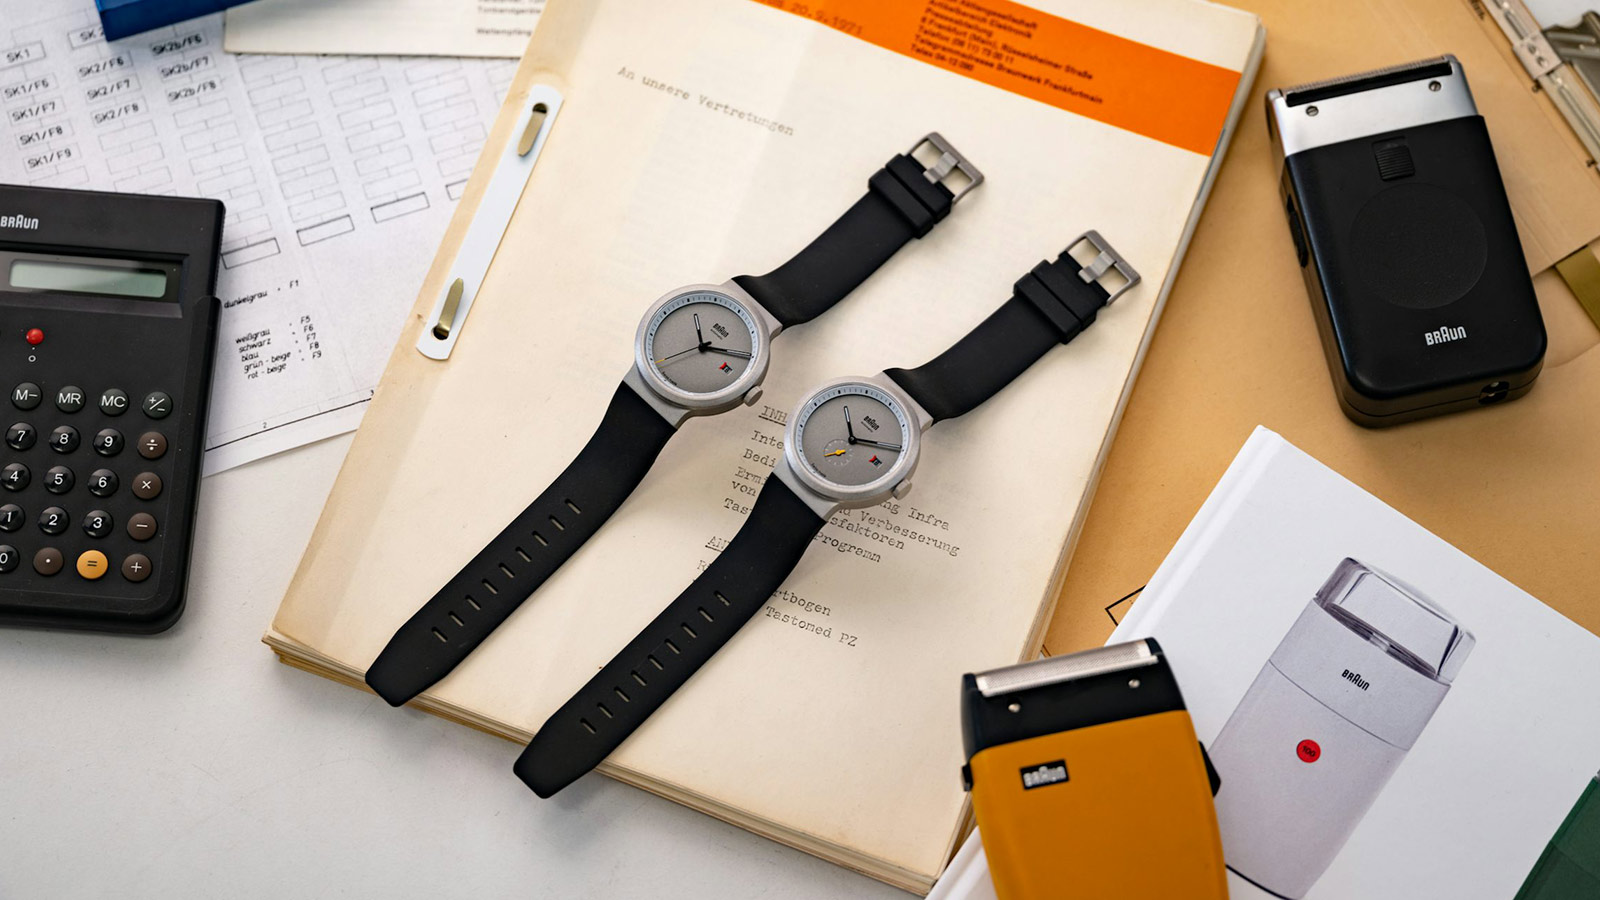 Braun BN0279 Center Seconds & Braun BN0279 Sub-Seconds Limited Editions For Hodinkee